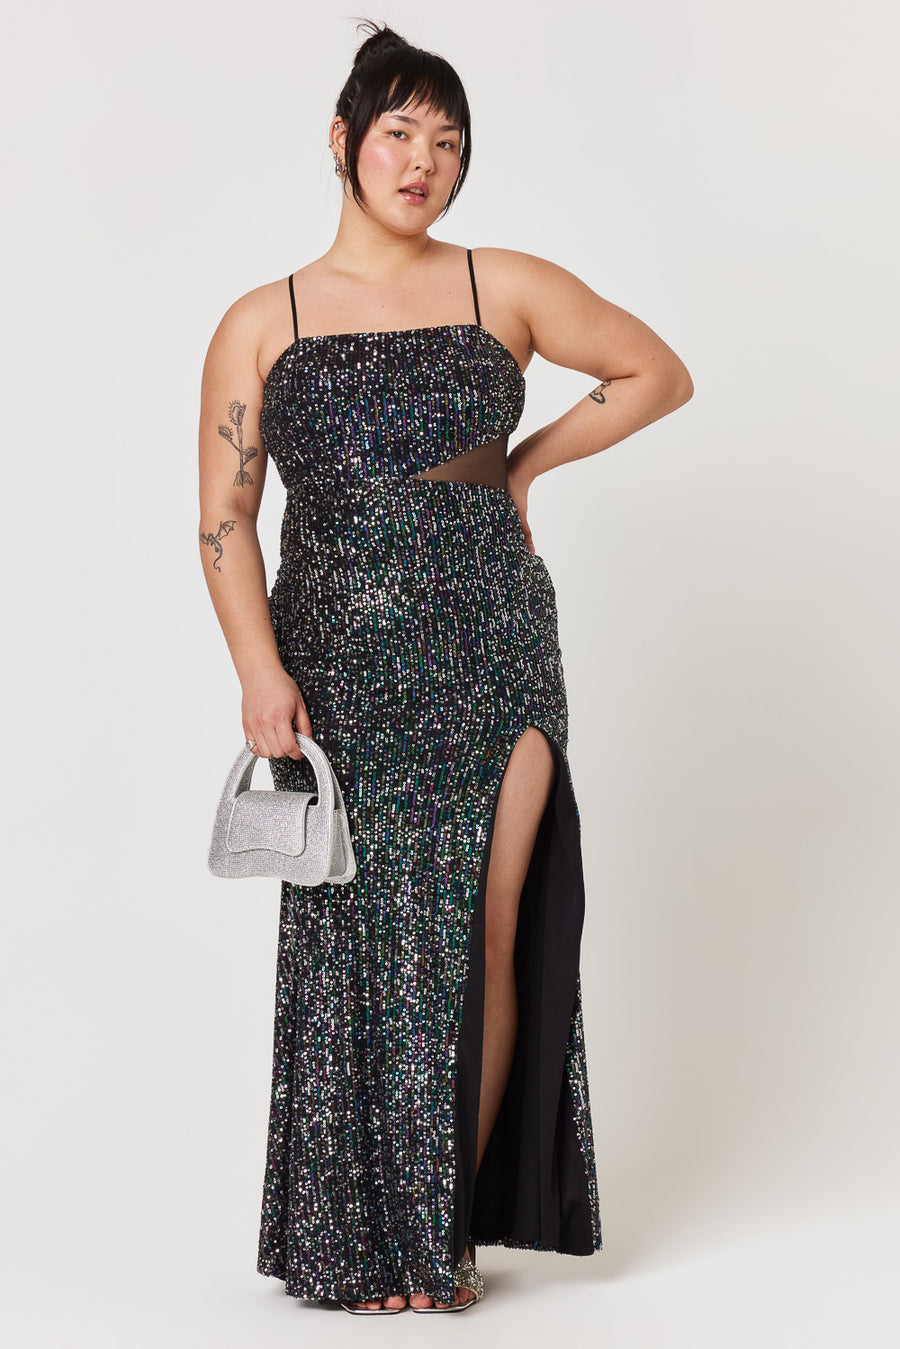 Black Silver Teal Mesh Cut Out Gown - Trixxi Clothing